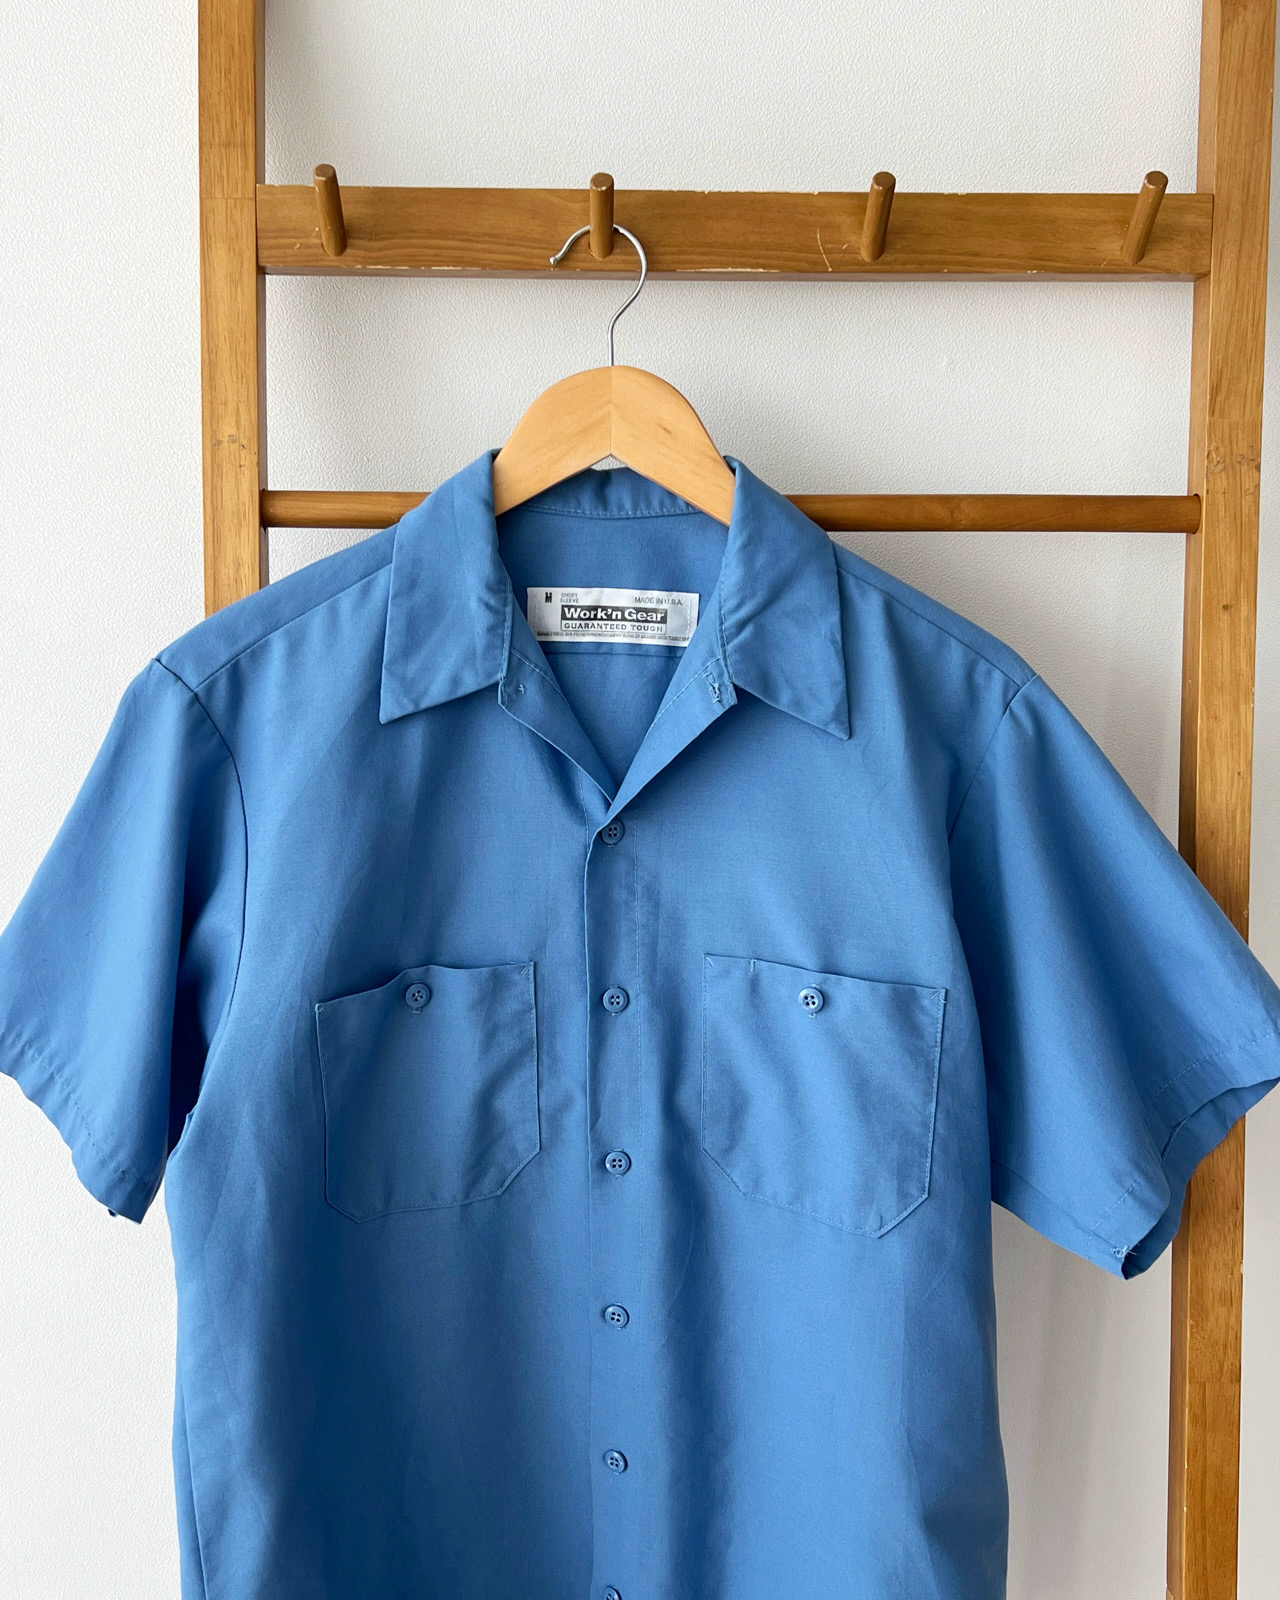 Solid Blue Shirts